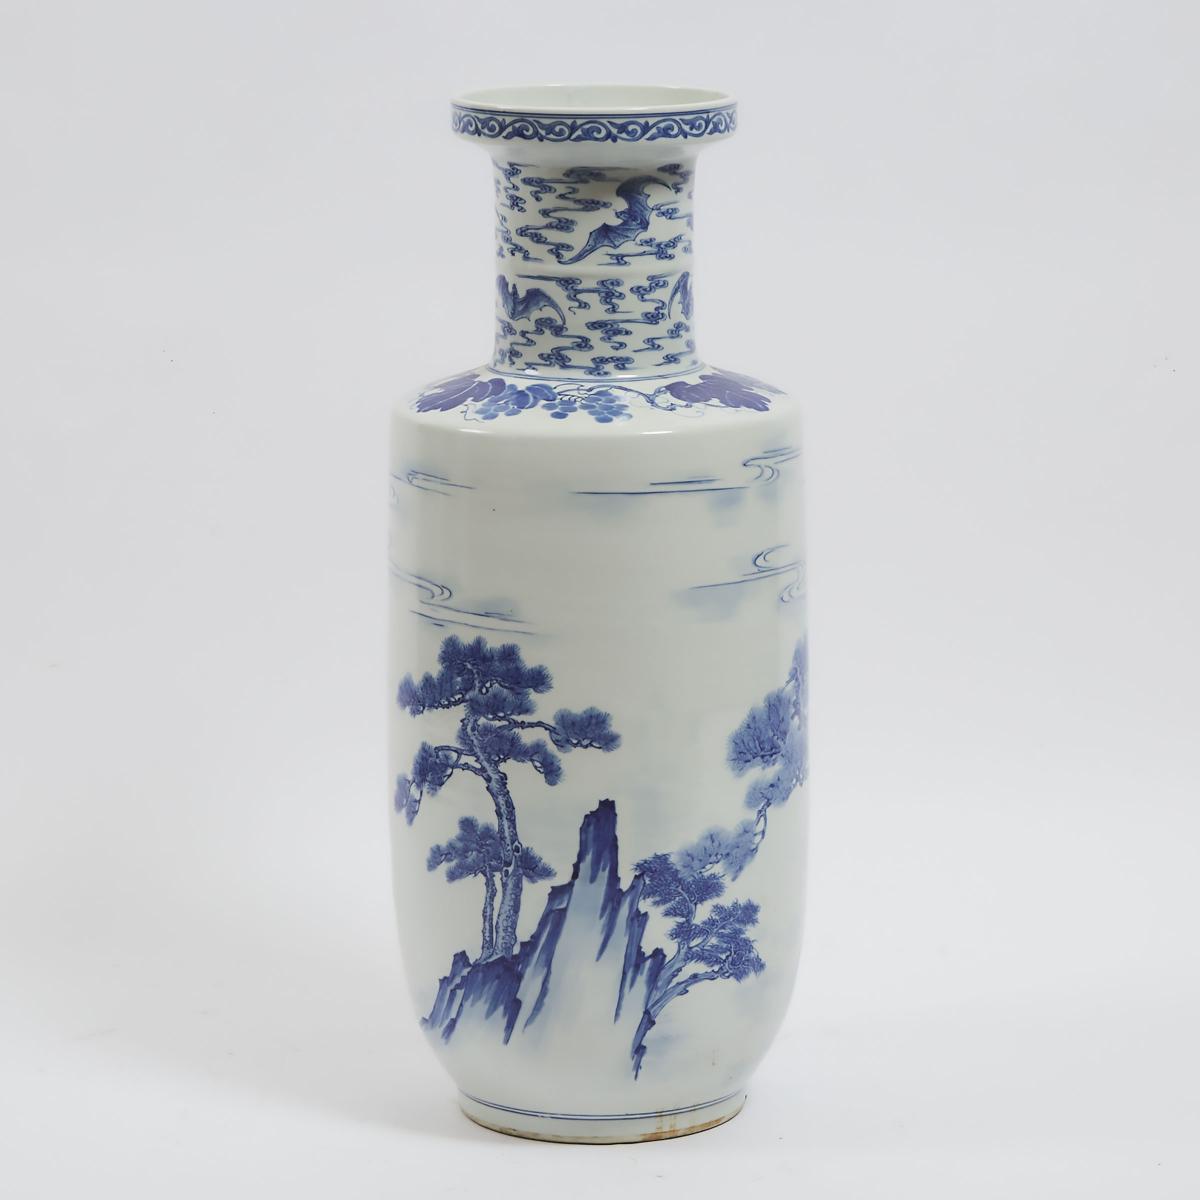 A Large Blue and White 'Birds and Pine' Vase, Early to Mid 20th Century, 民国时期 青花'苍鹰劲松'纹纸槌大瓶, height - Image 3 of 3